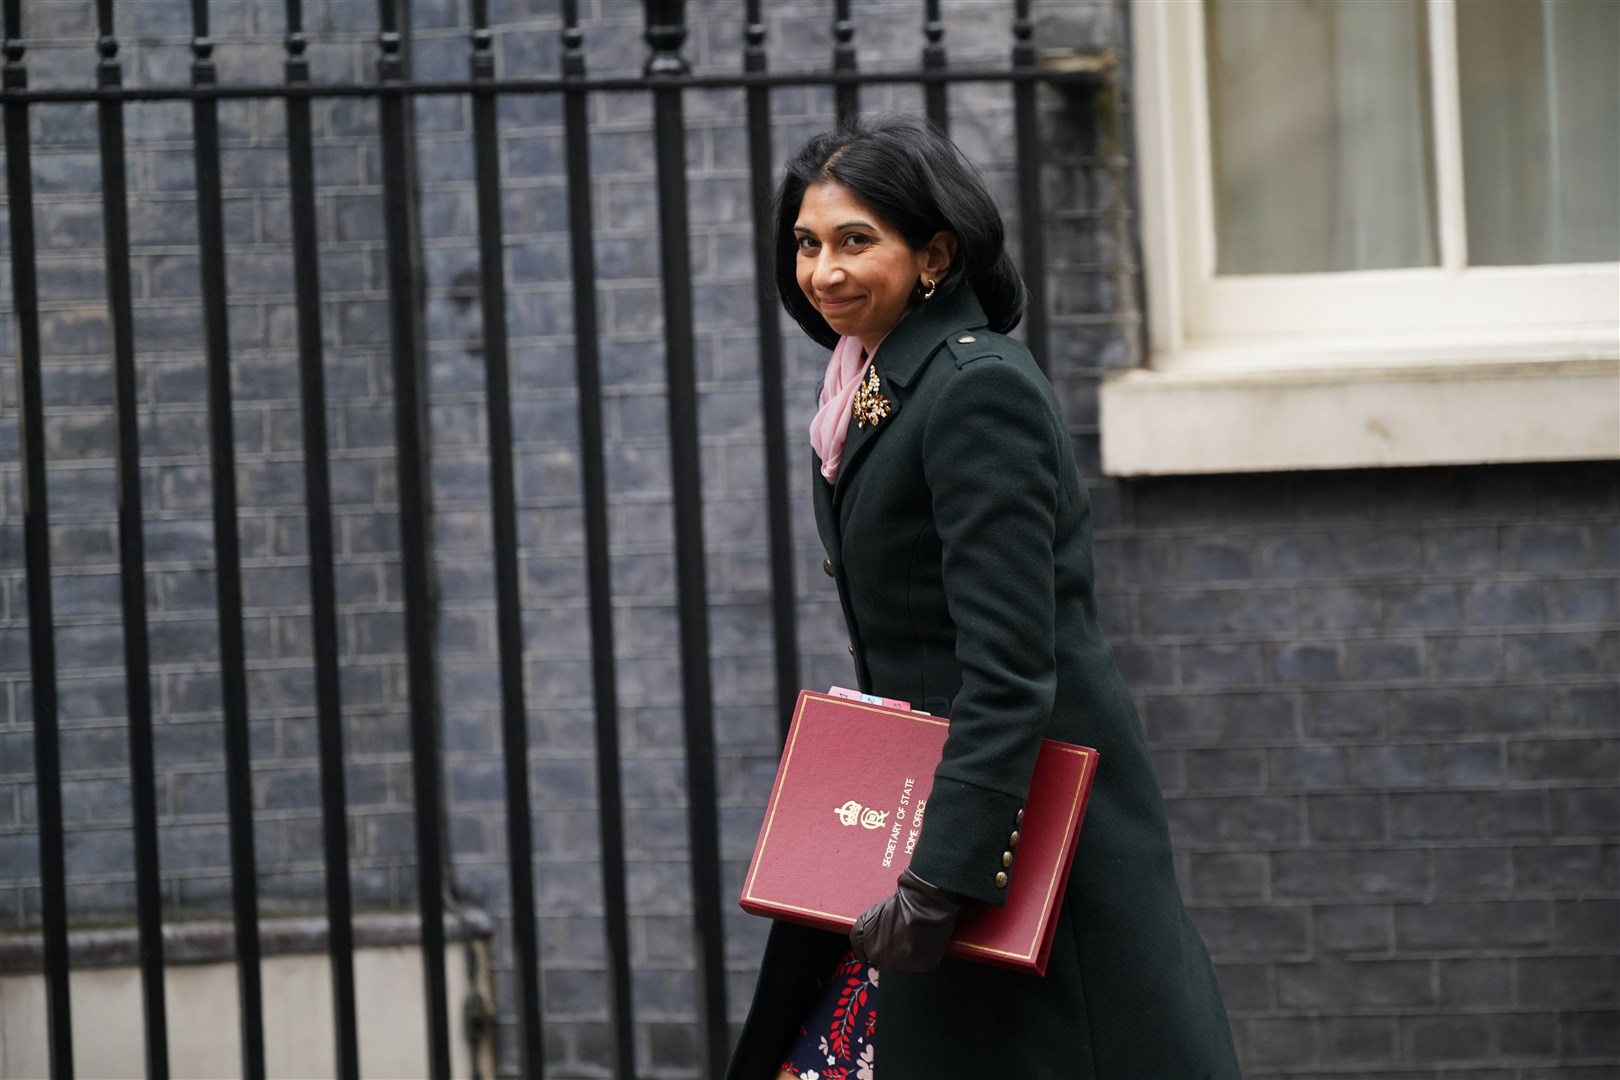 Home Secretary Suella Braverman plans to place a mandatory duty on professionals working with children to report concerns about sexual abuse (Yui Mok/PA)